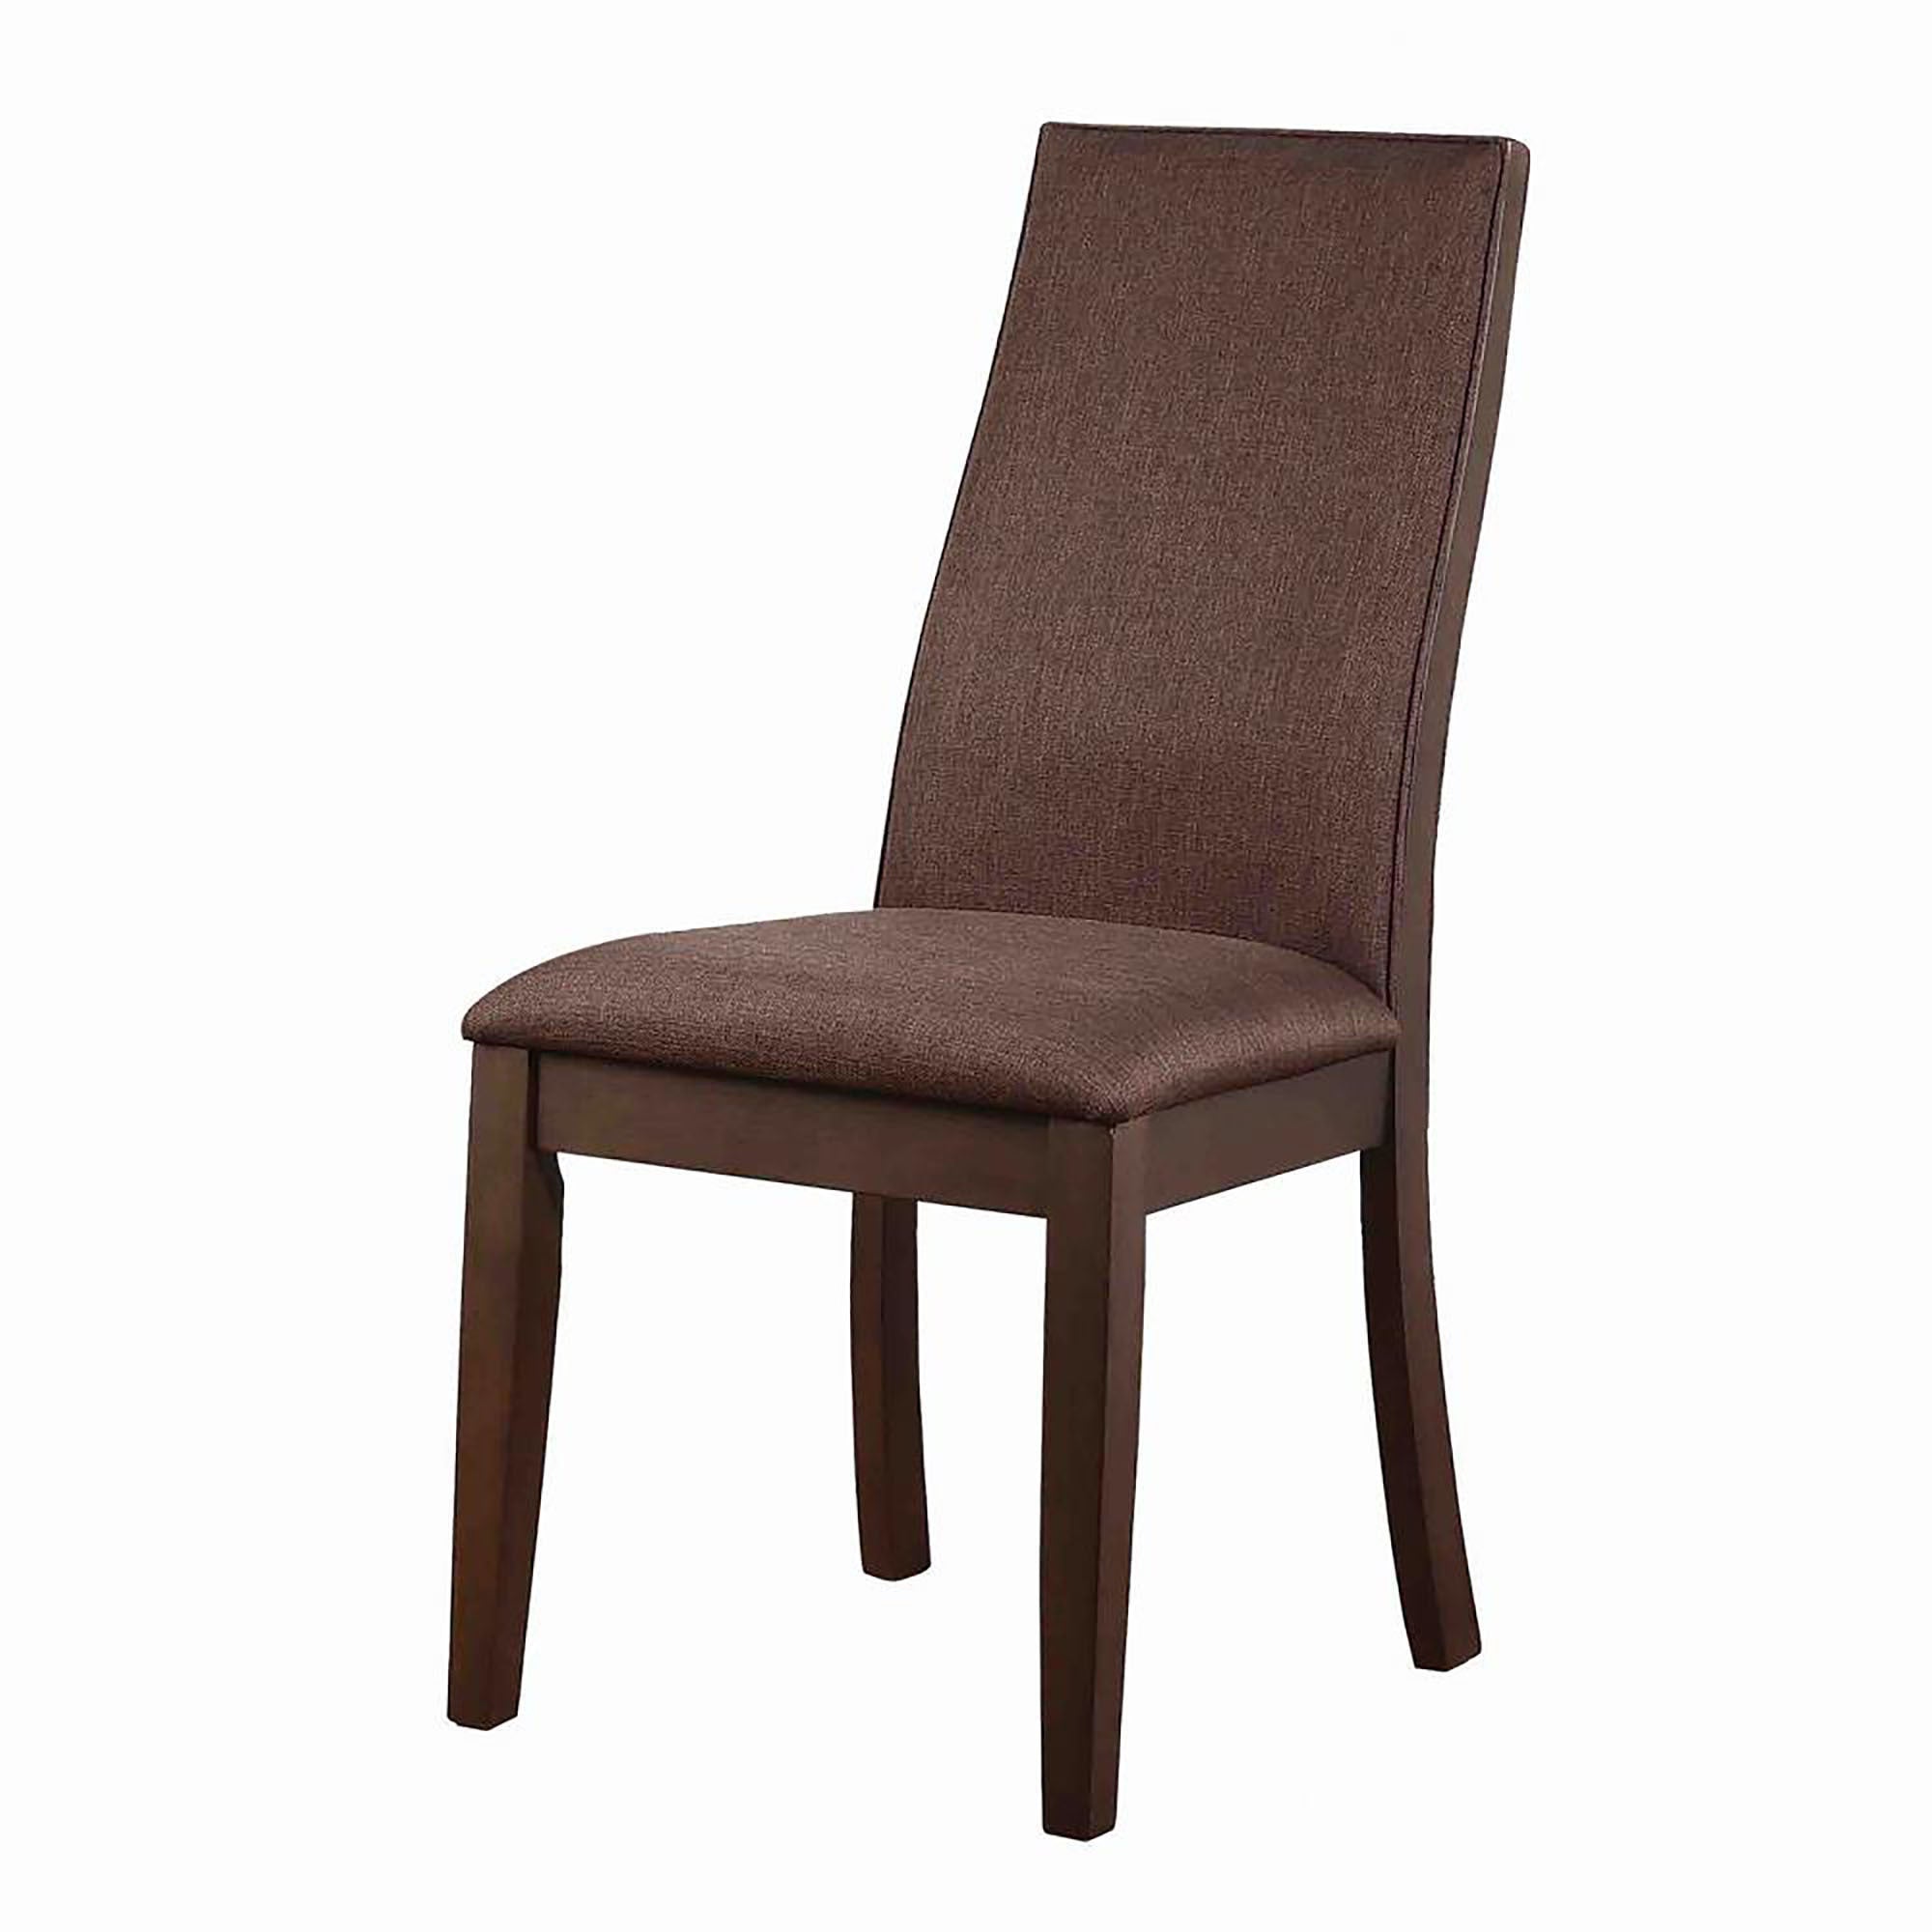 Chocolate and Espresso Dining Chair Set of 2